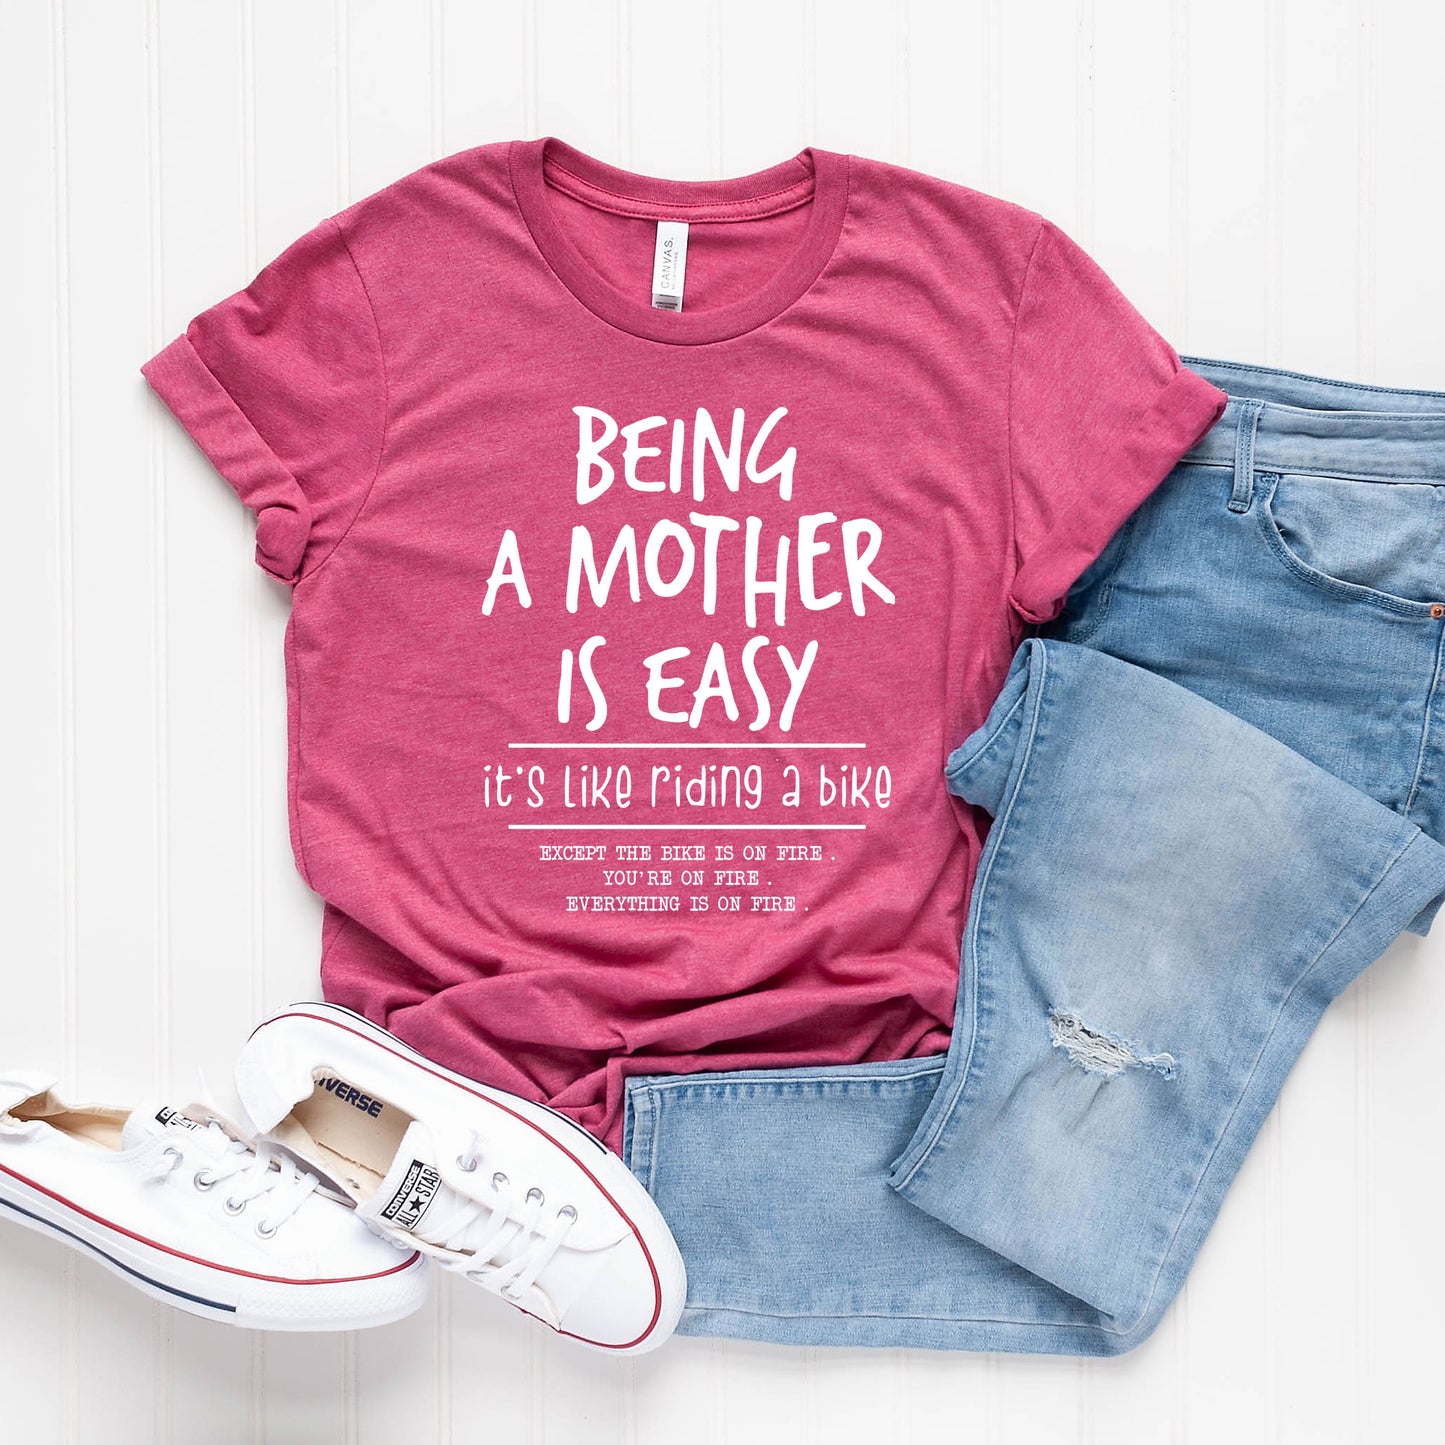 Being A Mother Is Easy | Short Sleeve Crew Neck